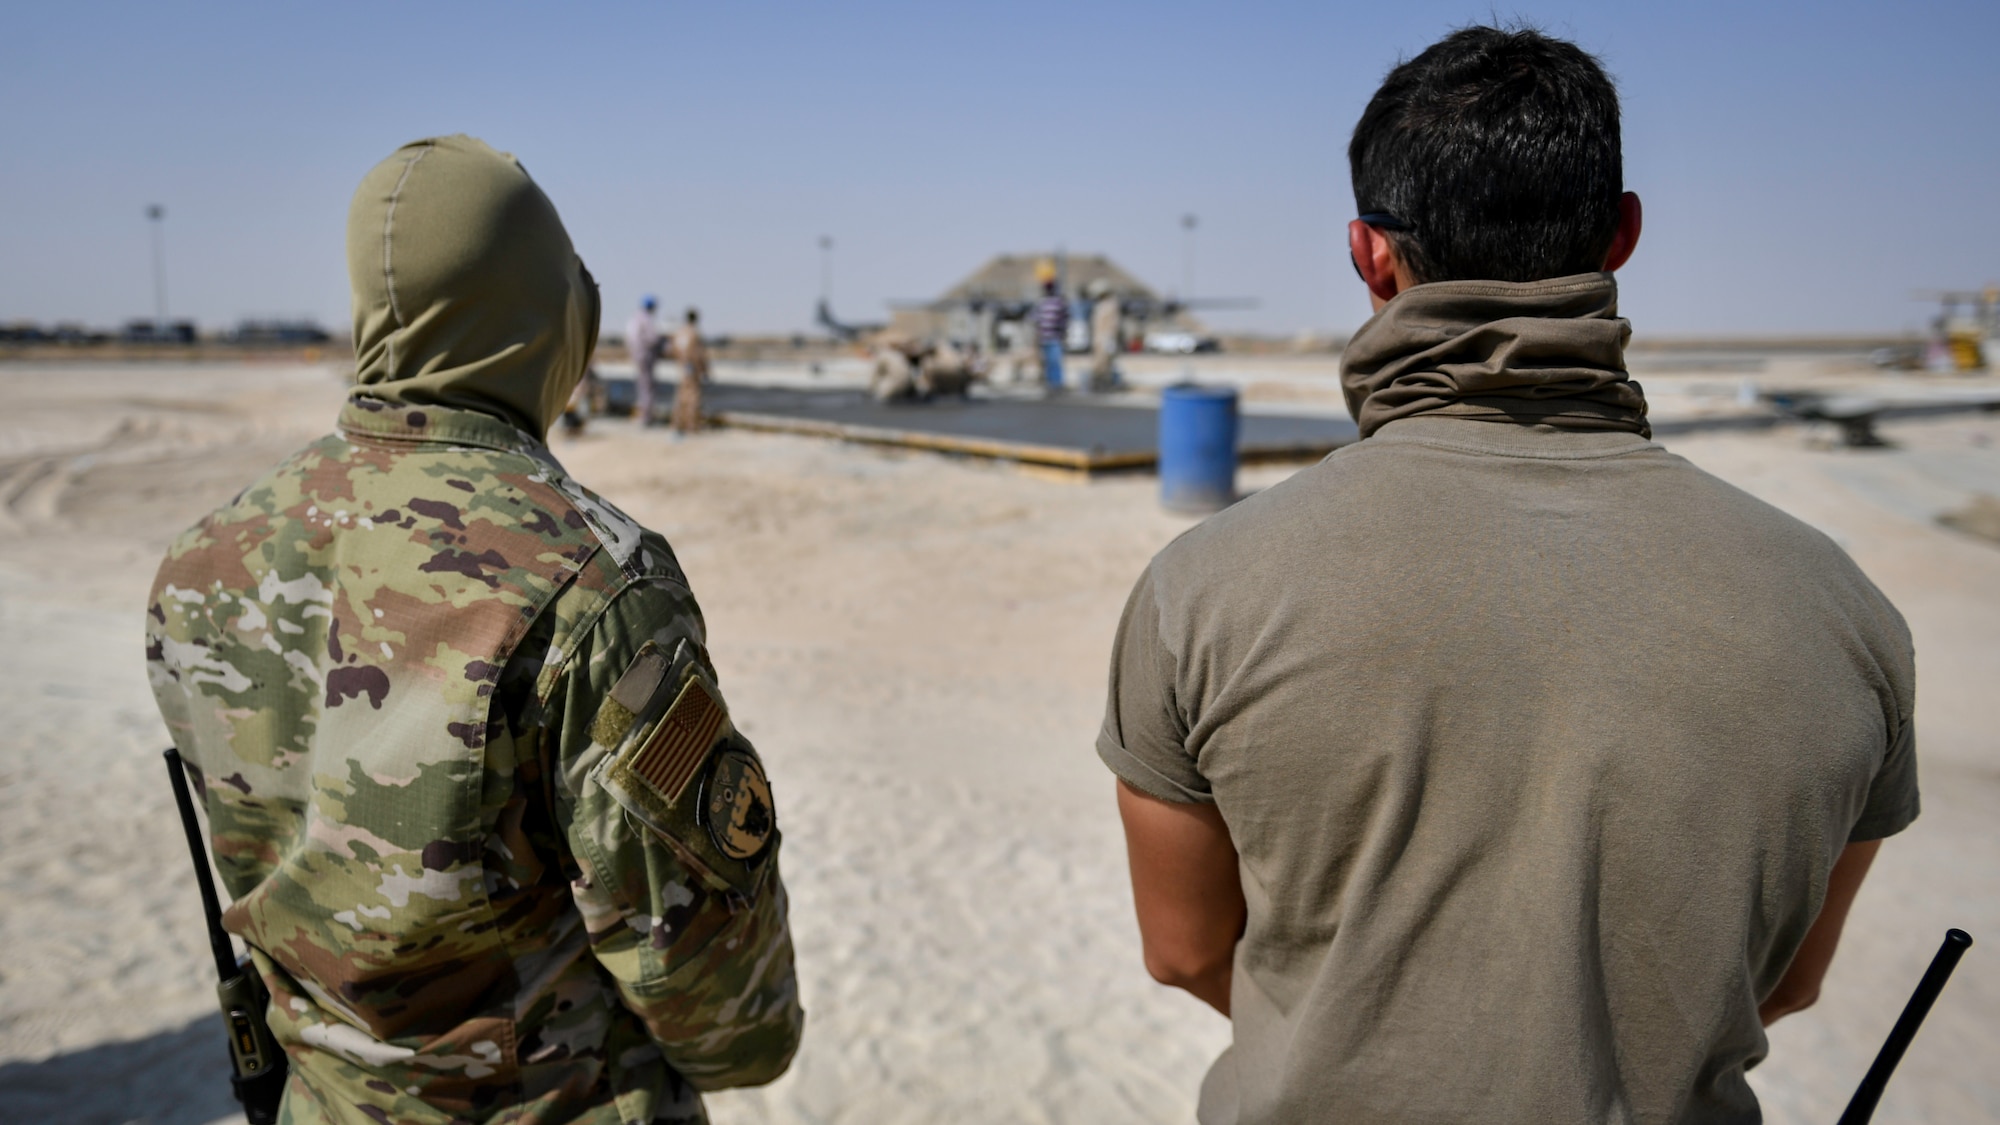 Airmen assigned to the 386th Expeditionary Civil Engineer Squadron observe contractors building an addition to the flightline at Ali Al Salem, Kuwait, Sept. 4, 2019. The force protection flight provides a security buffer between other country nationals such as contractors, their employees and the general base population. Airmen assist and escort OCNs during their duty day, help minimize potential data collection, and ensure the departure of vehicles and personnel once their services are completed for the day. (U.S. Air Force photo by Staff Sgt. Mozer O. Da Cunha)